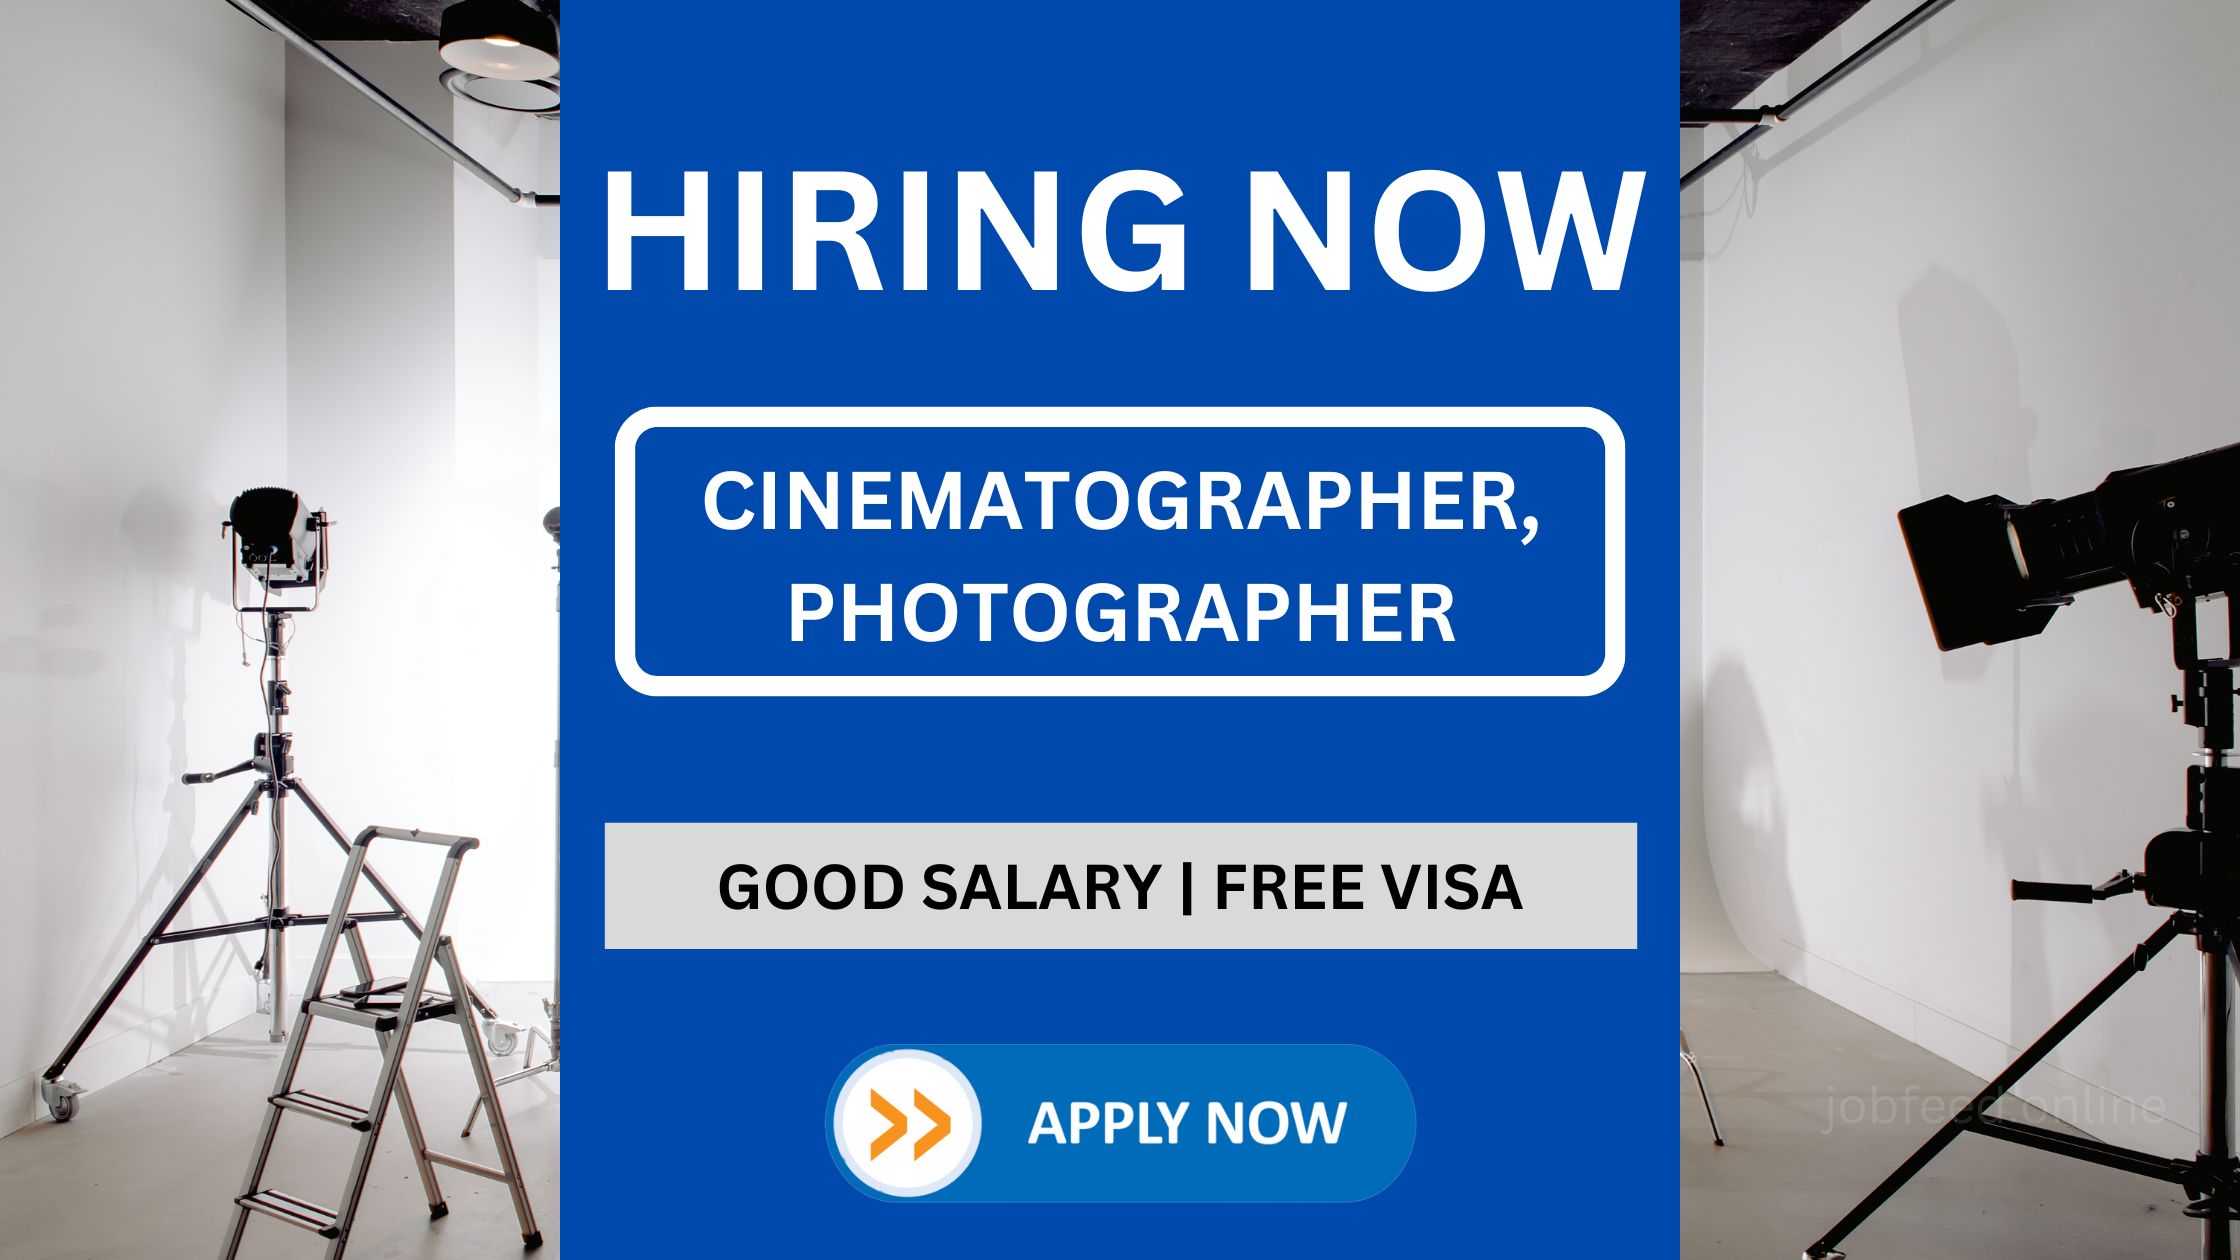 Professional cinematographer, Photographer, and 2 More Jobs